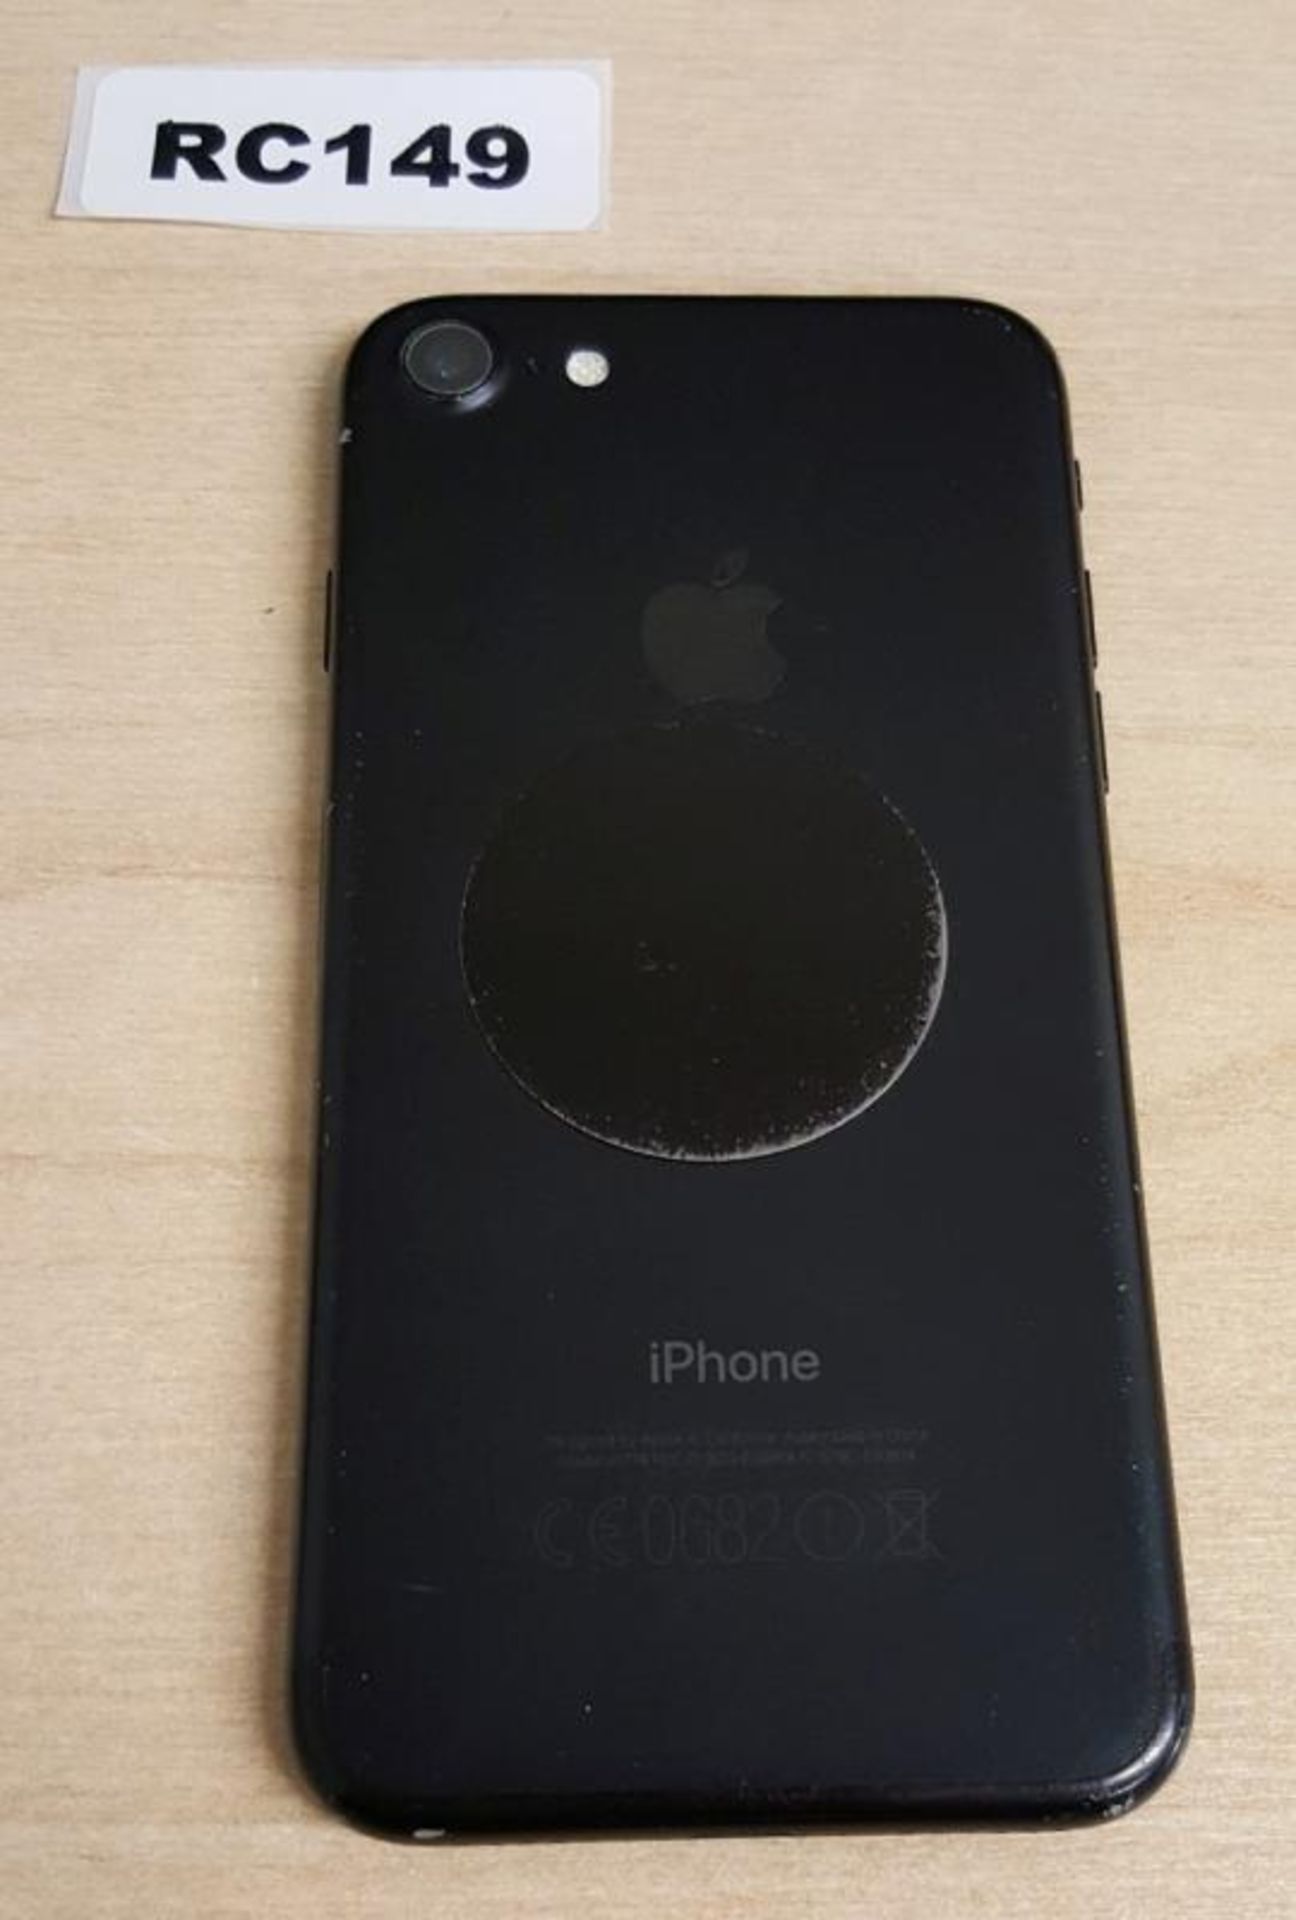 1 x Apple iPhone 7 a1778 128GB Black Smartphone (Phone Has Been Turned On And Factory Reset) Does No - Image 2 of 2